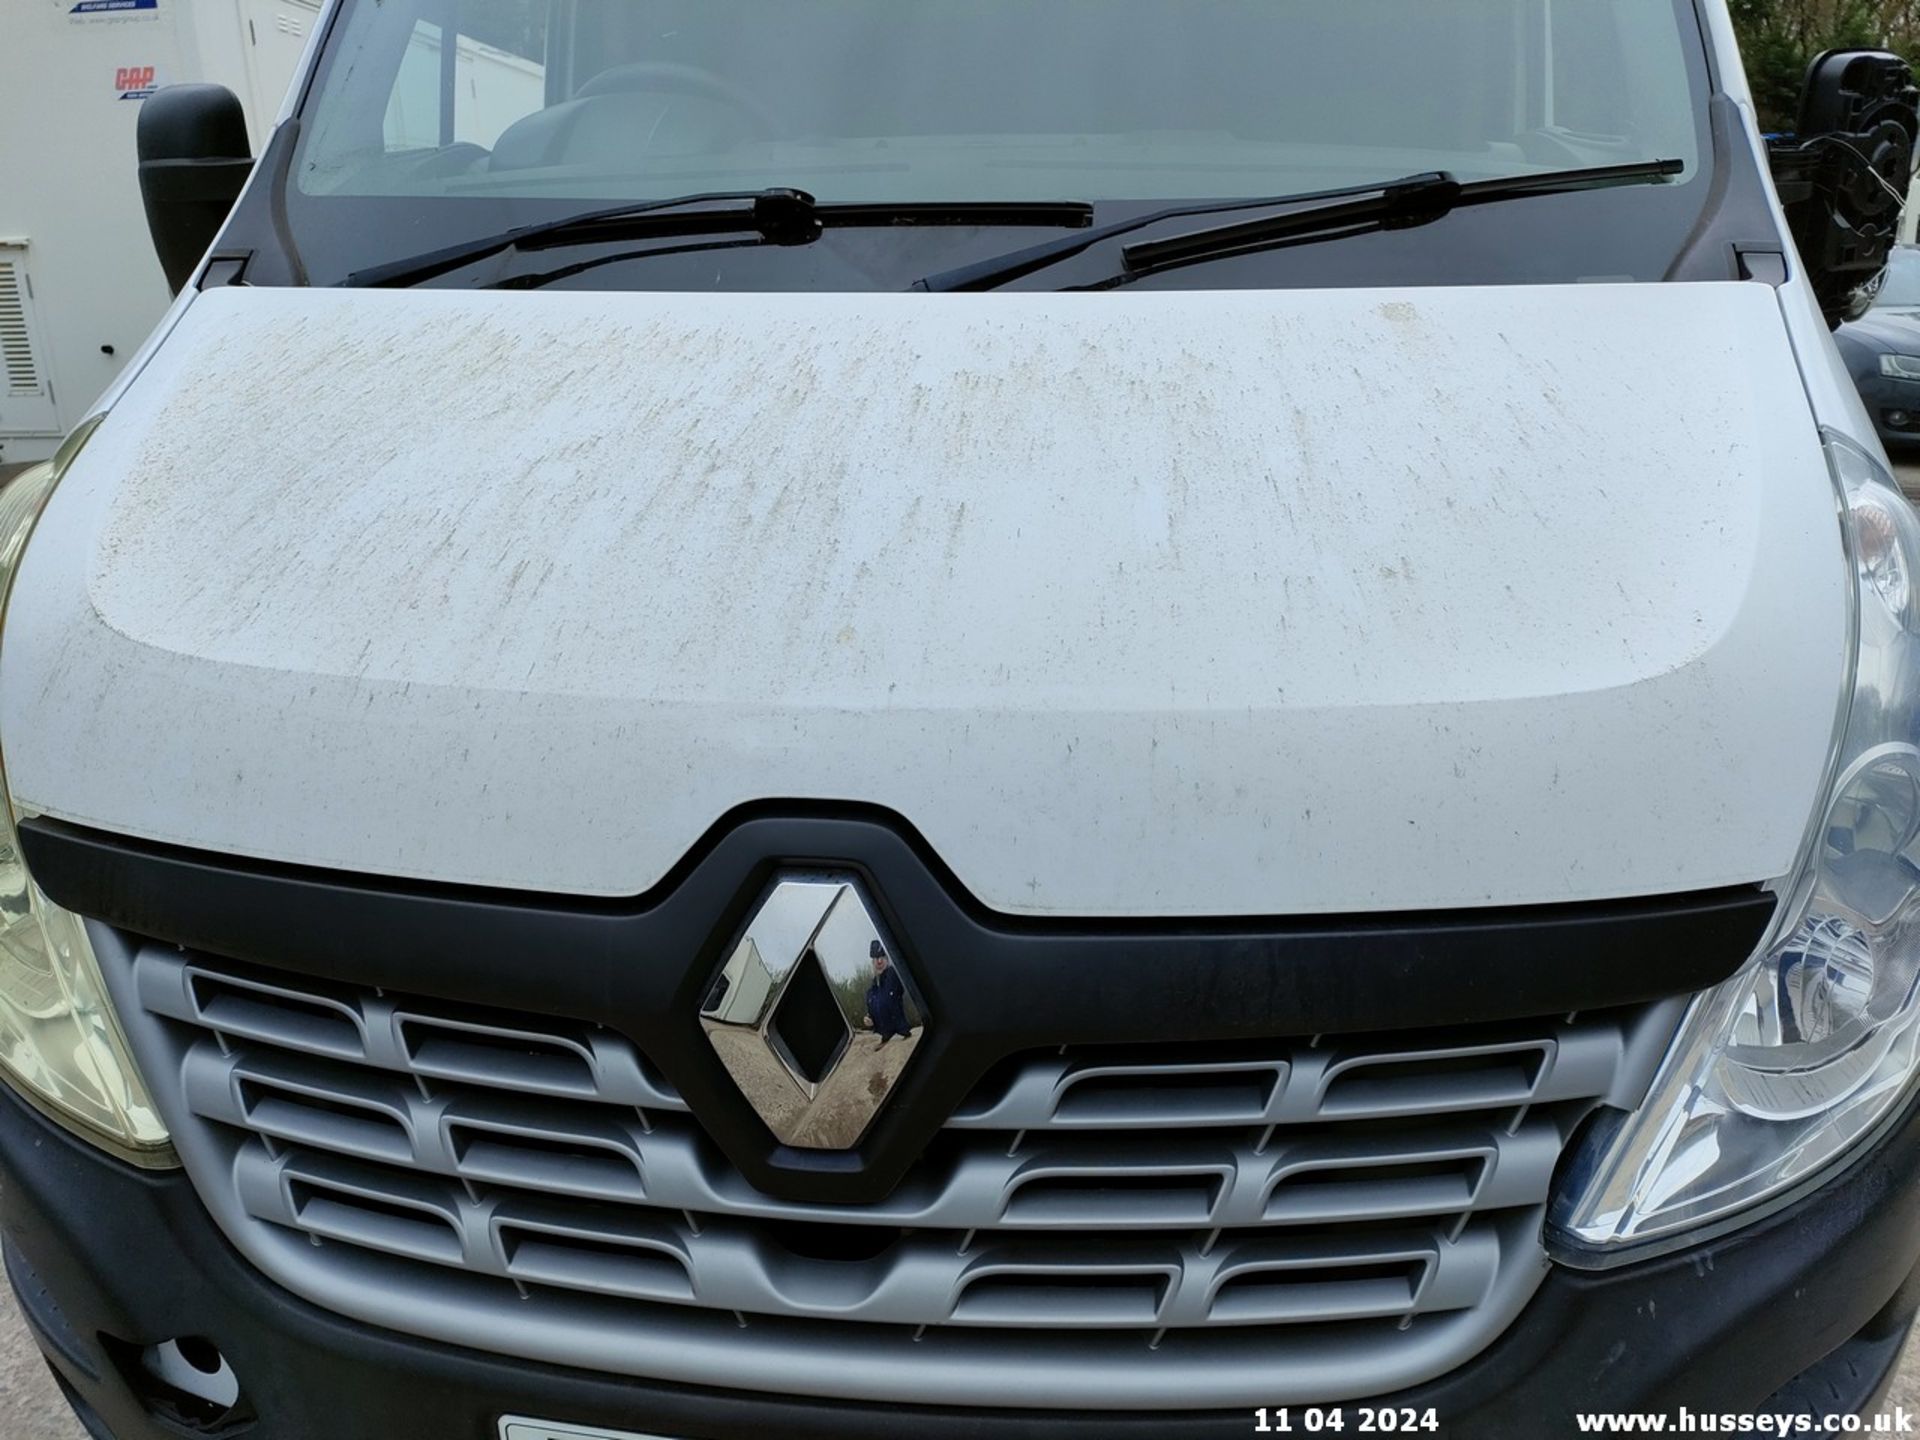 18/68 RENAULT MASTER LM35 BUSINESS DCI - 2298cc 5dr Van (White) - Image 13 of 68